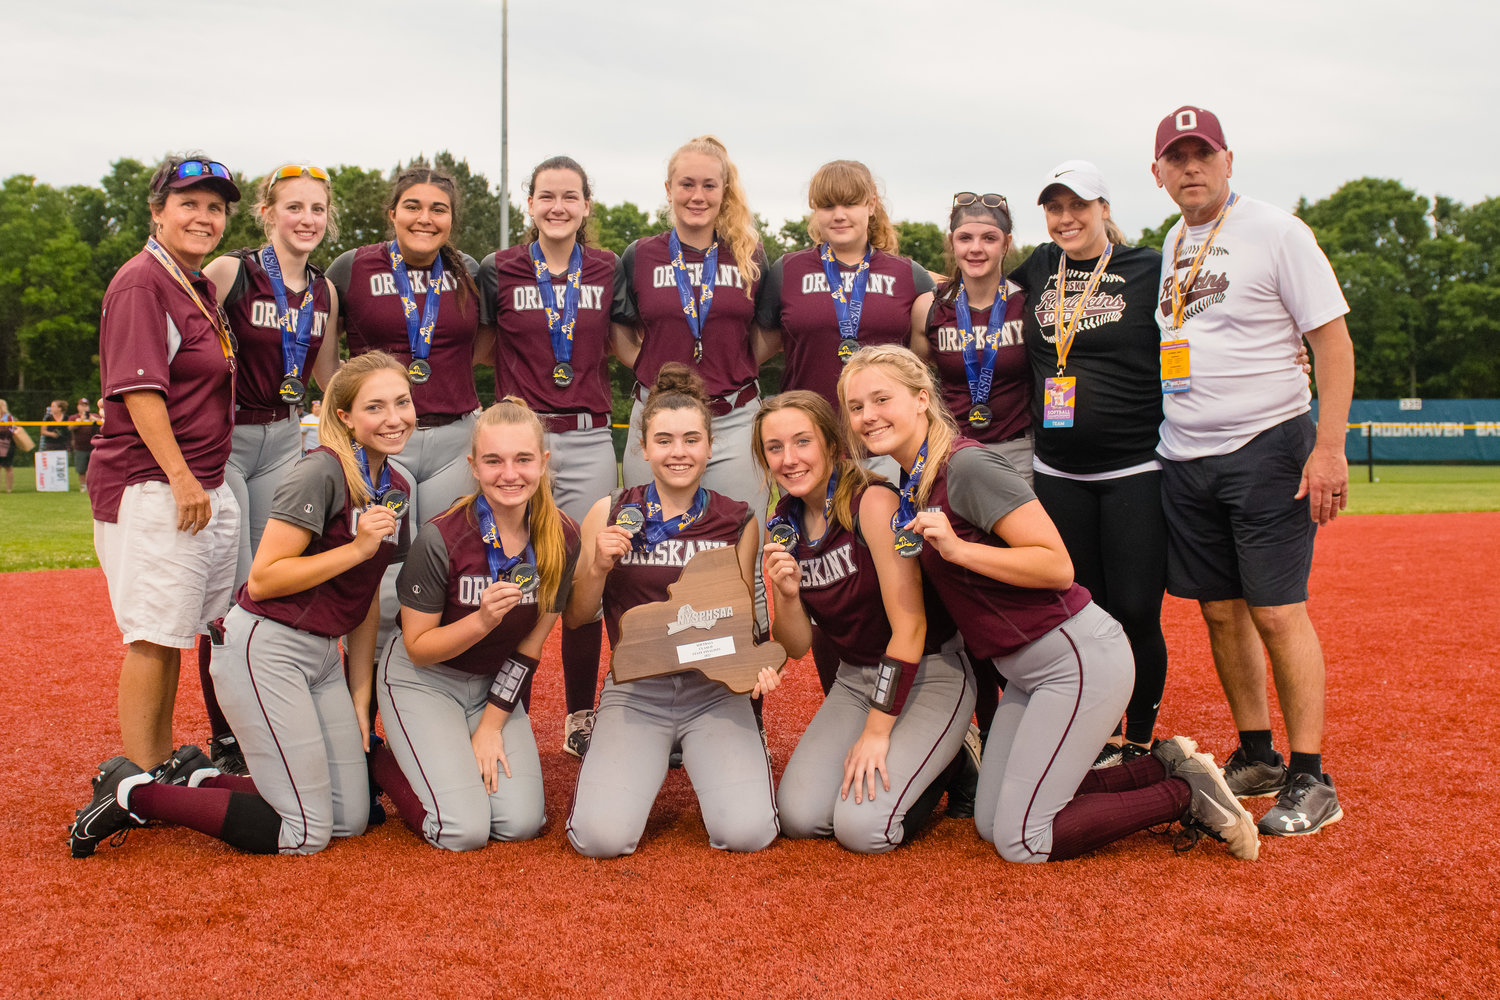 The Oriskany softball team finished as runner-up in Class D this season. It was the first state final four appearance for Oriskany.